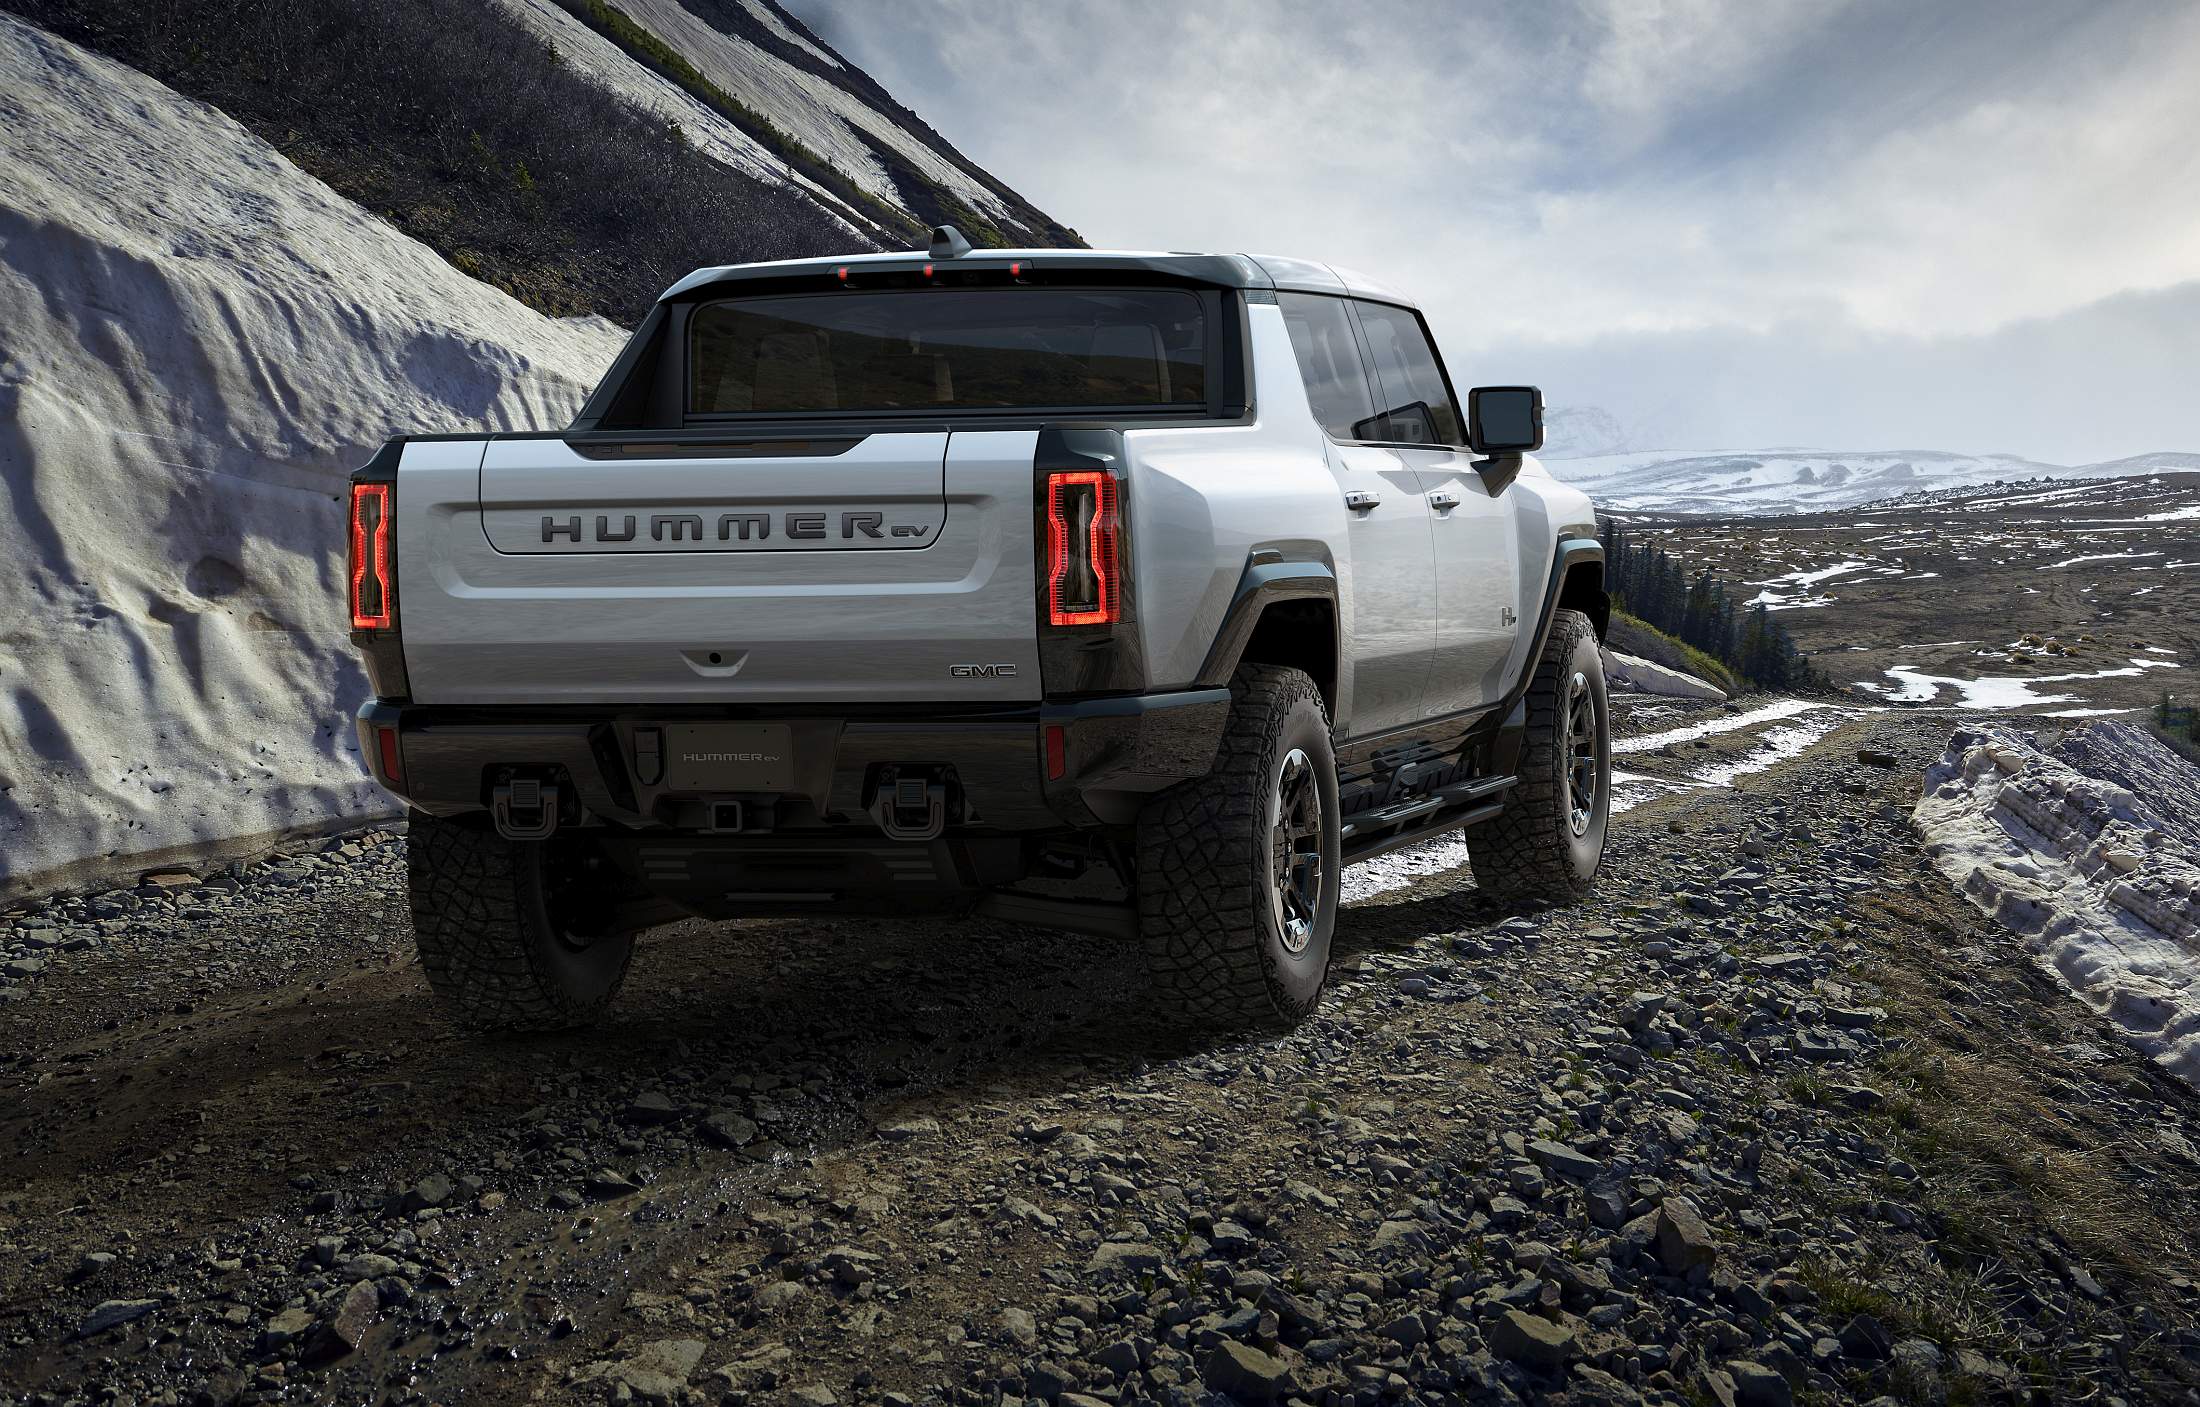 The 2022 GMC HUMMER EV is a first-of-its kind supertruck develop